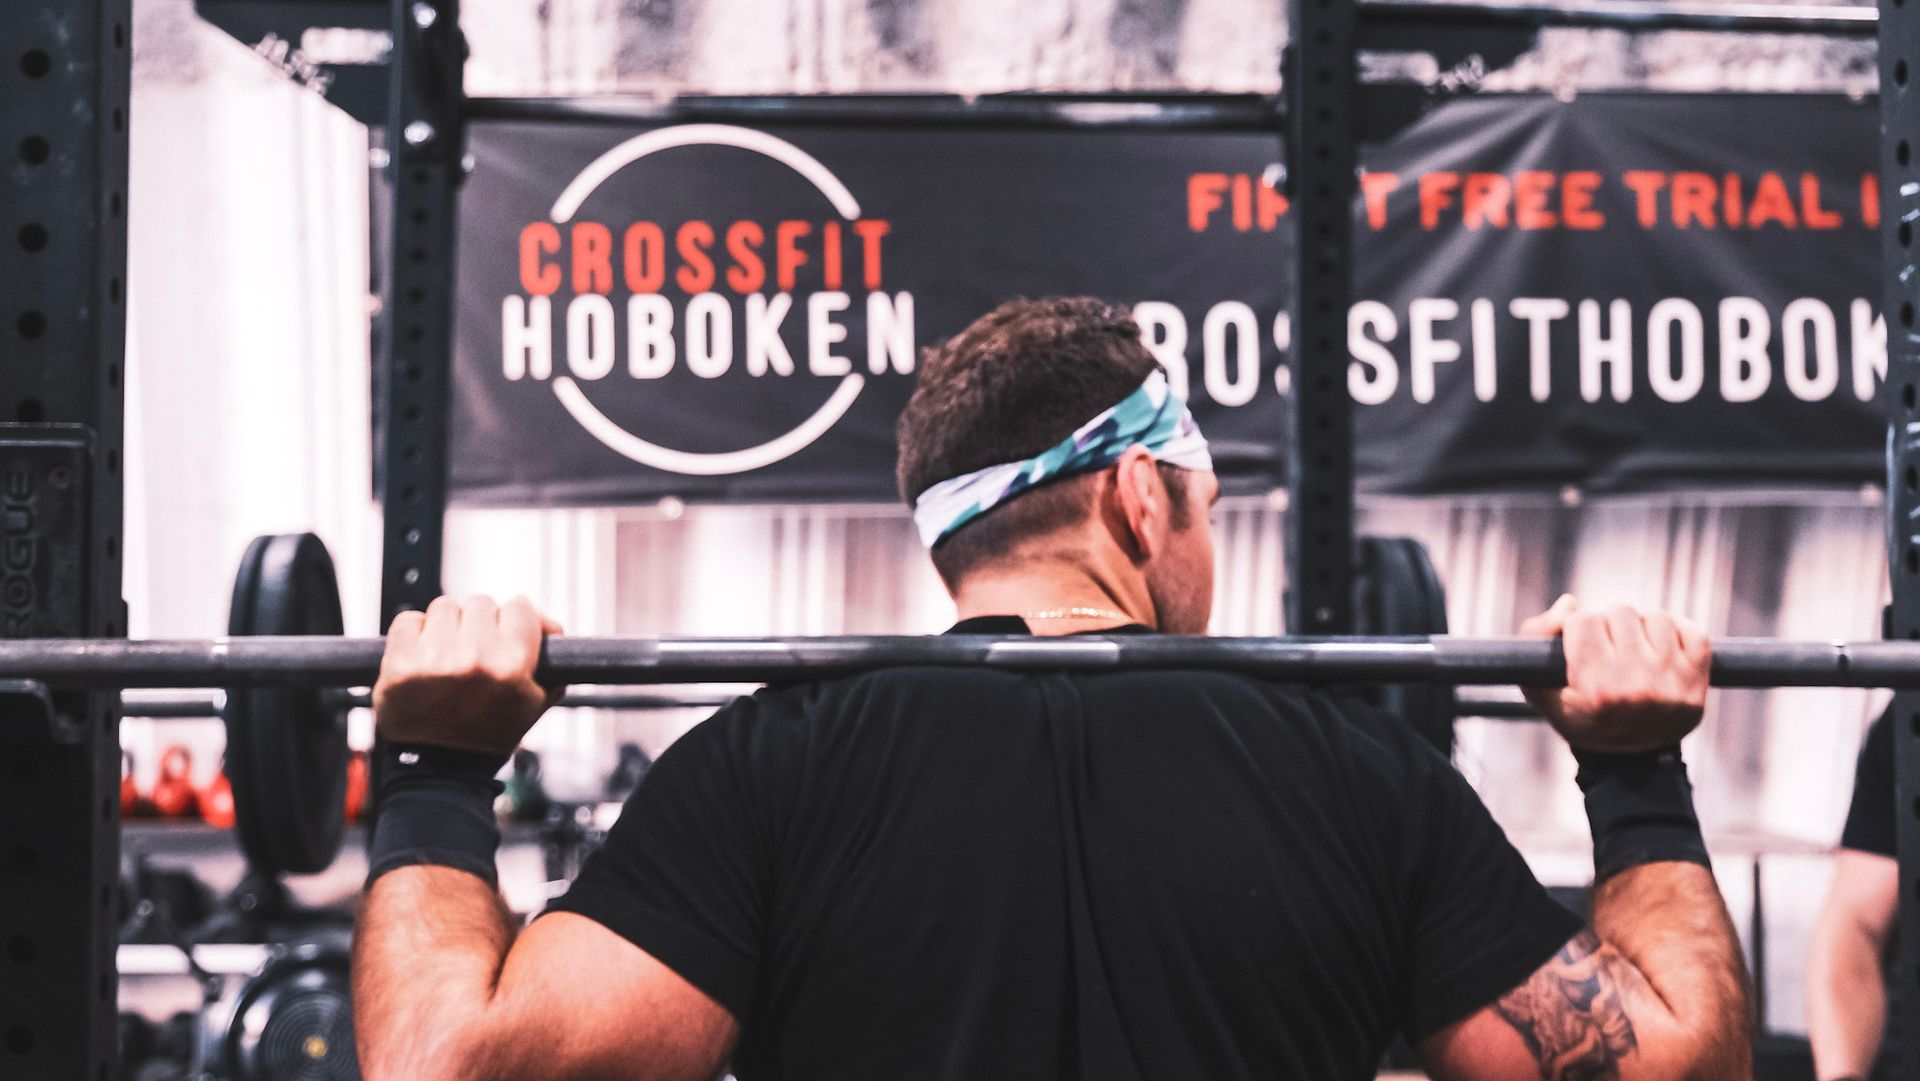 A man is squatting with a barbell in front of a sign that says crossfit hoboken.